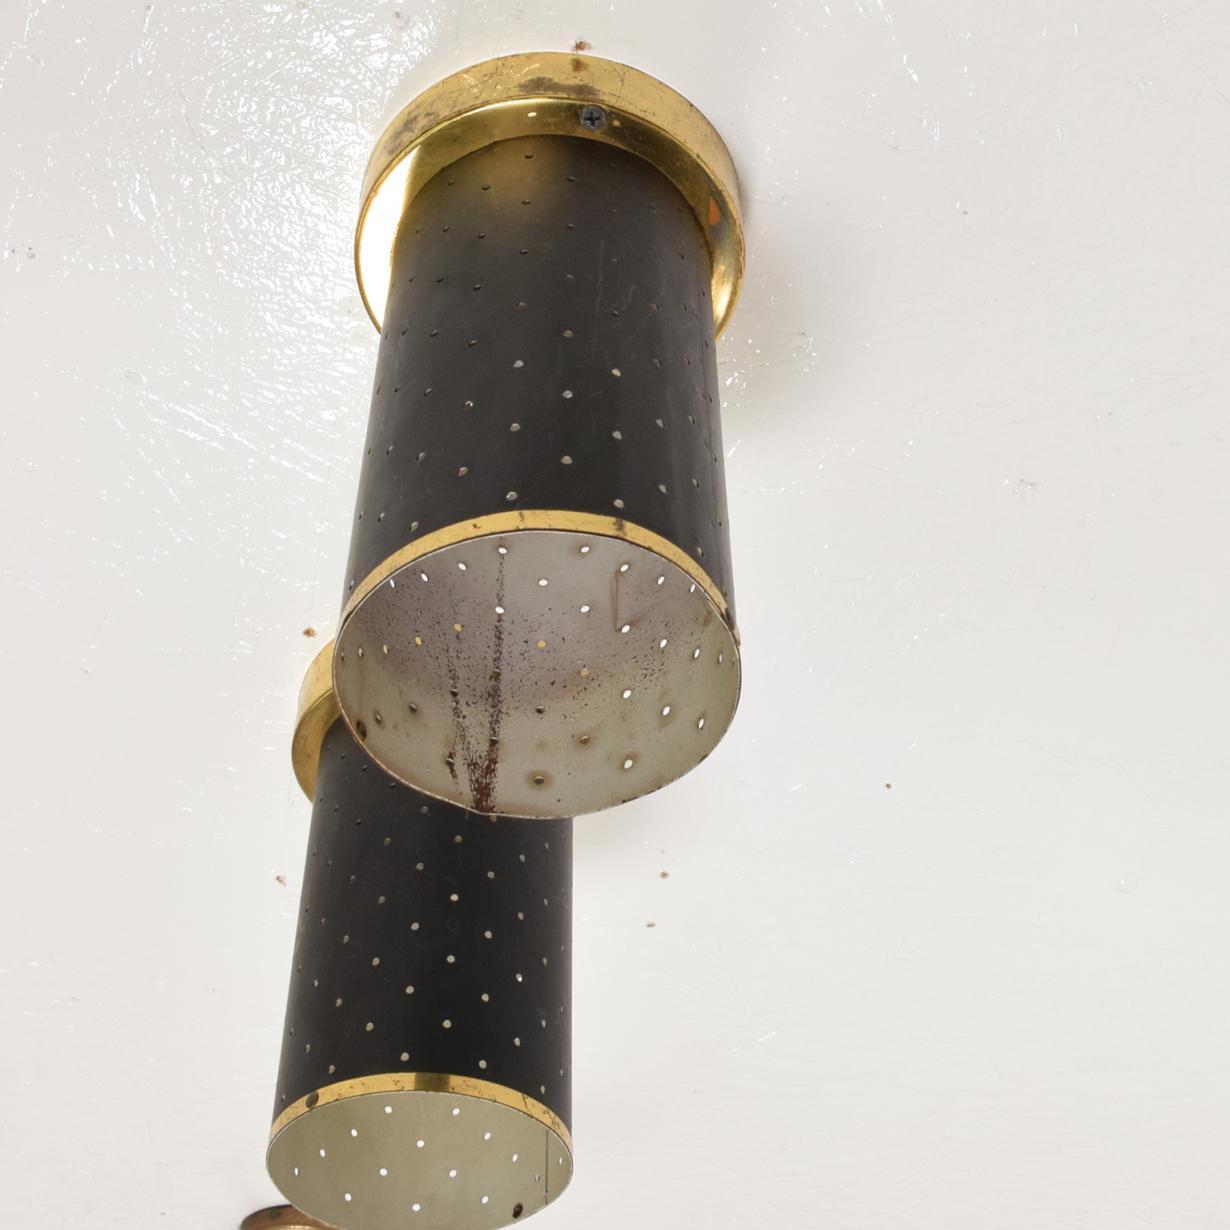 Patinated Mid-Century Modern Pair of Wall or Ceiling Sconces in Black & Brass, Lightolier